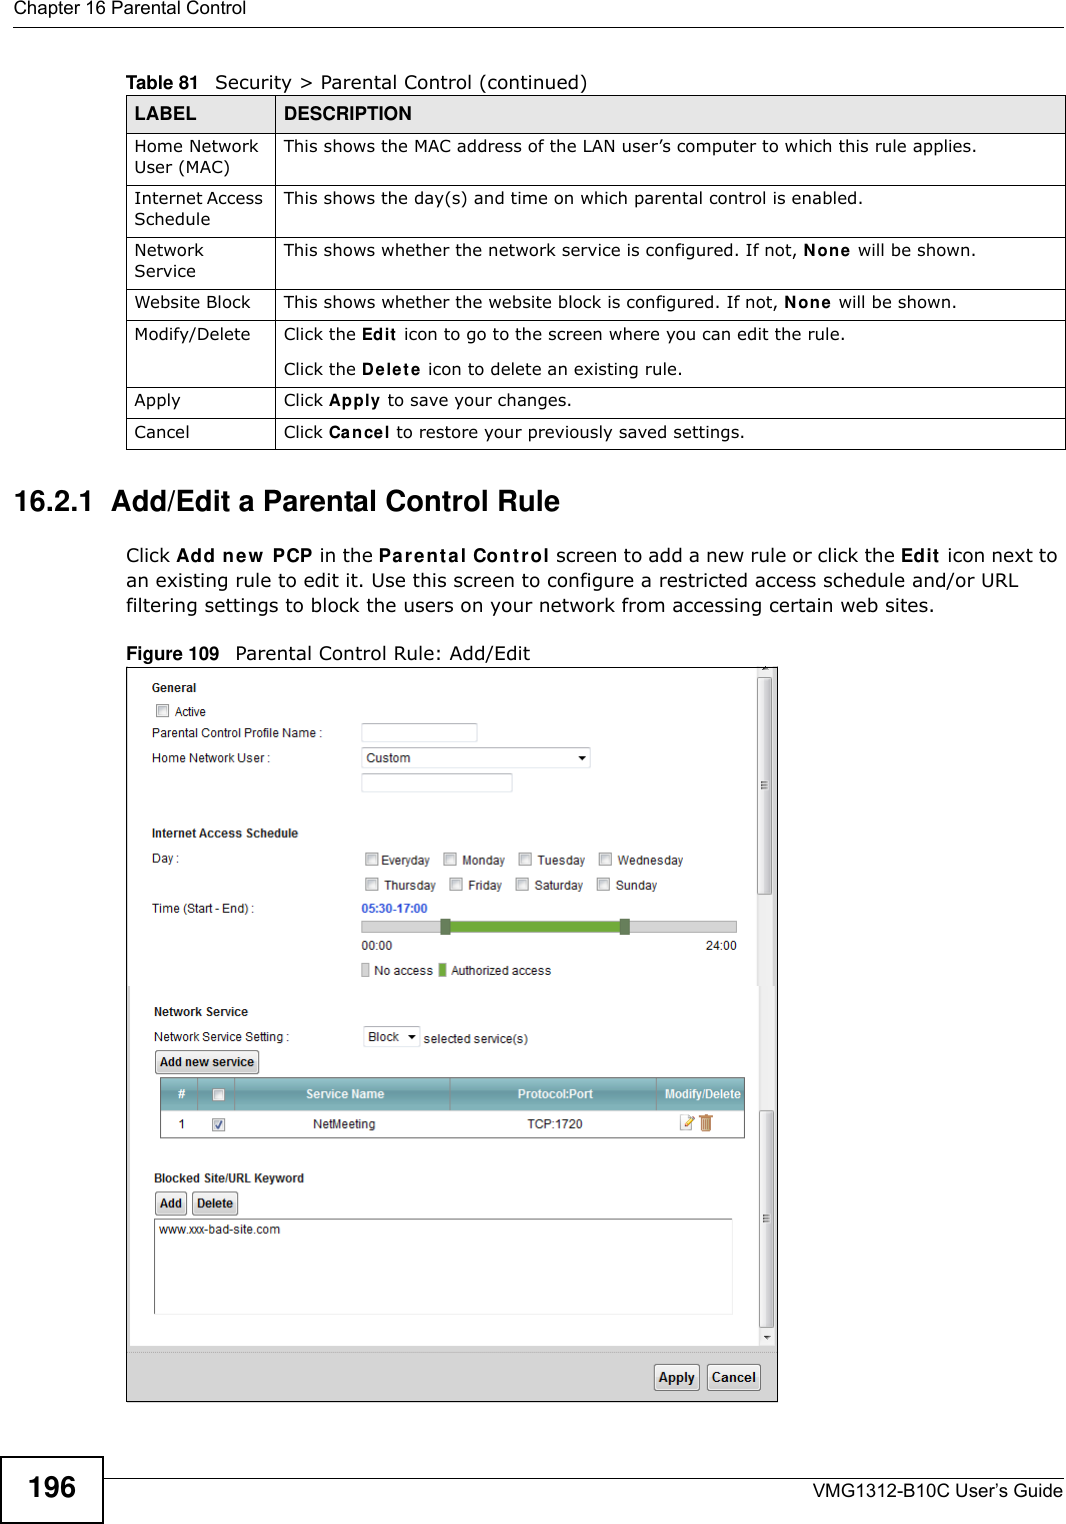 Chapter 16 Parental ControlVMG1312-B10C User’s Guide19616.2.1  Add/Edit a Parental Control RuleClick Add ne w  PCP in the Pa r e nt a l Cont r ol screen to add a new rule or click the Edit  icon next to an existing rule to edit it. Use this screen to configure a restricted access schedule and/or URL filtering settings to block the users on your network from accessing certain web sites.Figure 109   Parental Control Rule: Add/Edit Home Network User (MAC)This shows the MAC address of the LAN user’s computer to which this rule applies.Internet Access ScheduleThis shows the day(s) and time on which parental control is enabled.Network ServiceThis shows whether the network service is configured. If not, N on e  will be shown.Website Block This shows whether the website block is configured. If not, N on e  will be shown.Modify/Delete Click the Edit  icon to go to the screen where you can edit the rule.Click the D ele t e  icon to delete an existing rule.Apply Click Apply to save your changes.Cancel Click Cancel to restore your previously saved settings.Table 81   Security &gt; Parental Control (continued)LABEL DESCRIPTION